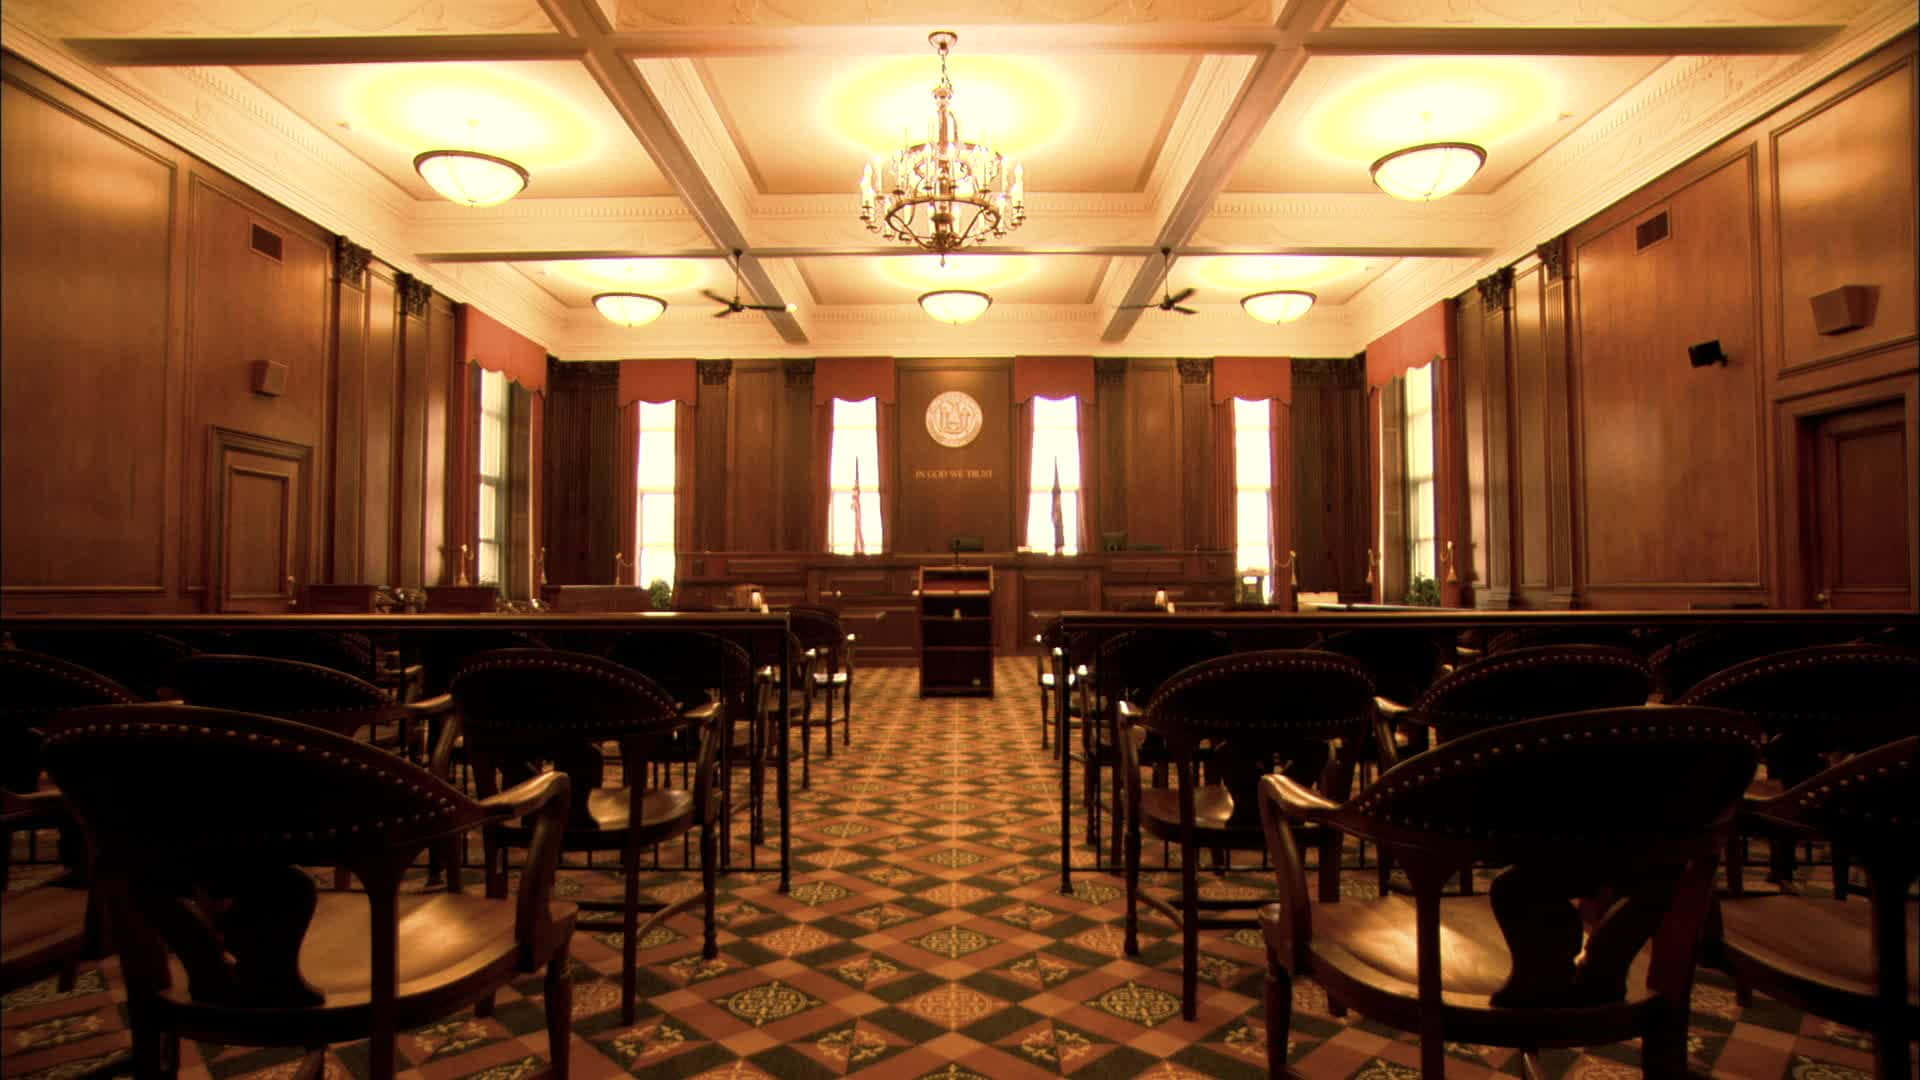 A Courtroom With Rows Of Chairs